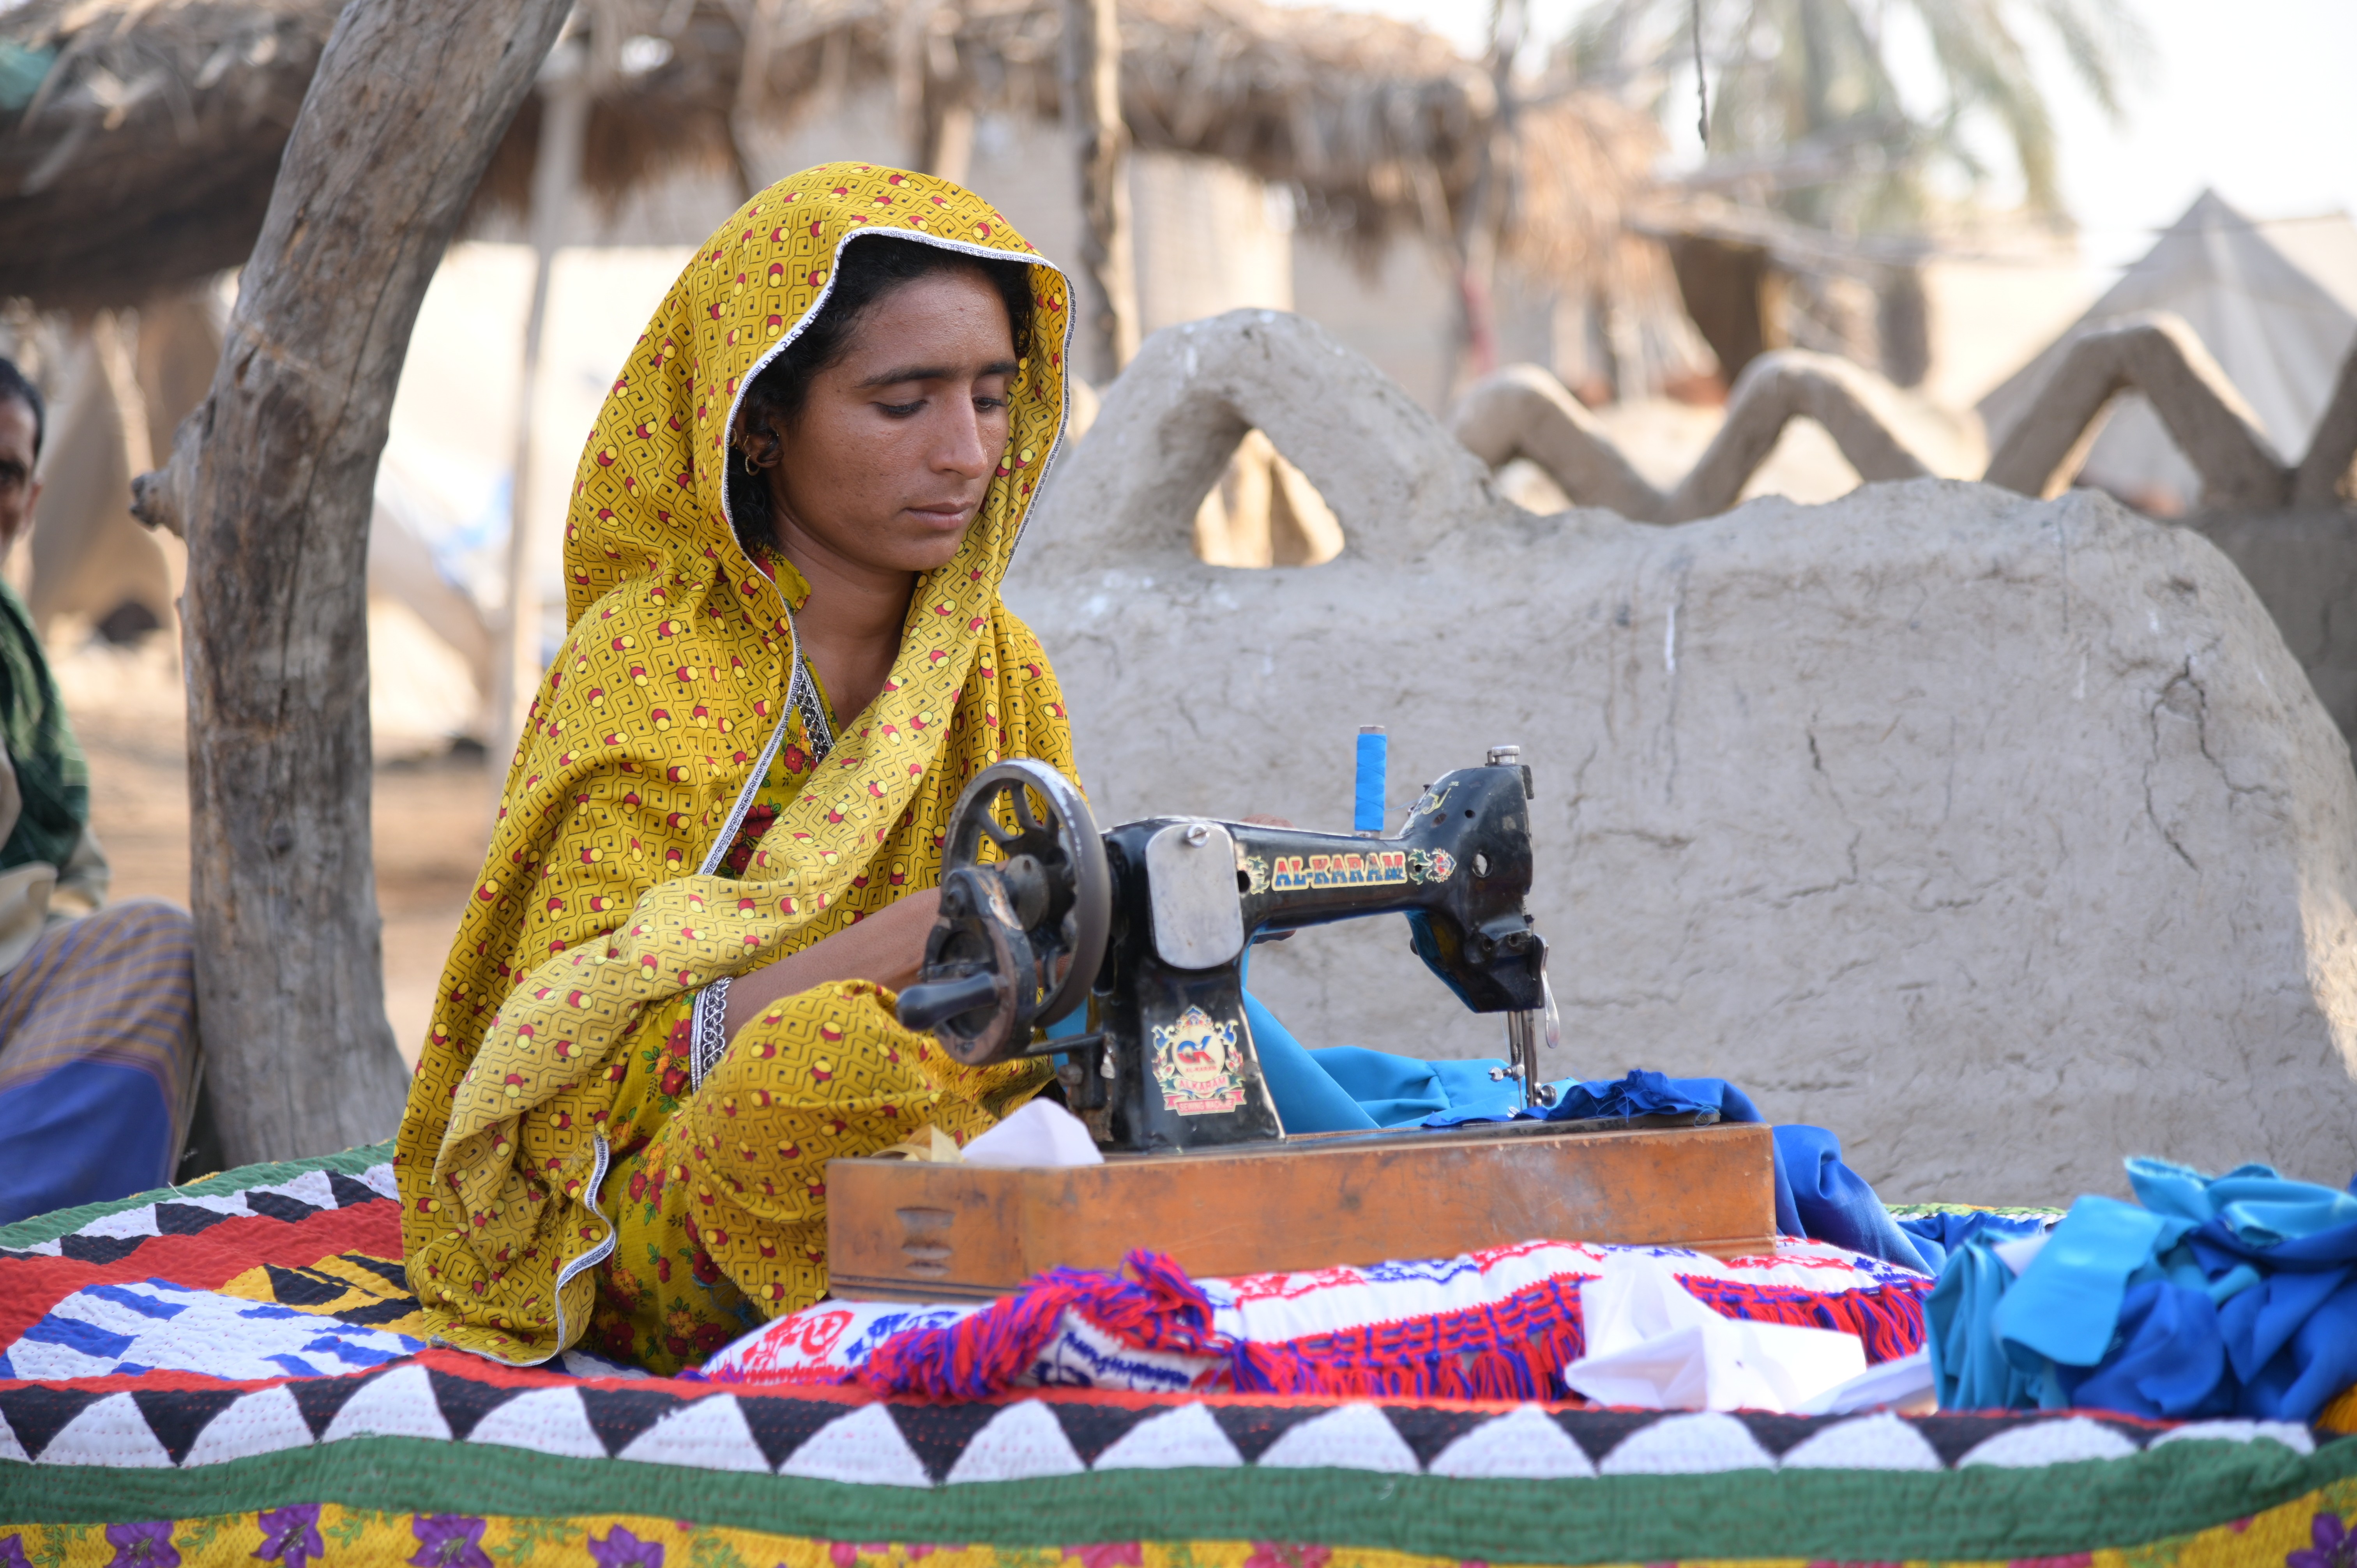 A woman busy in sewing dress